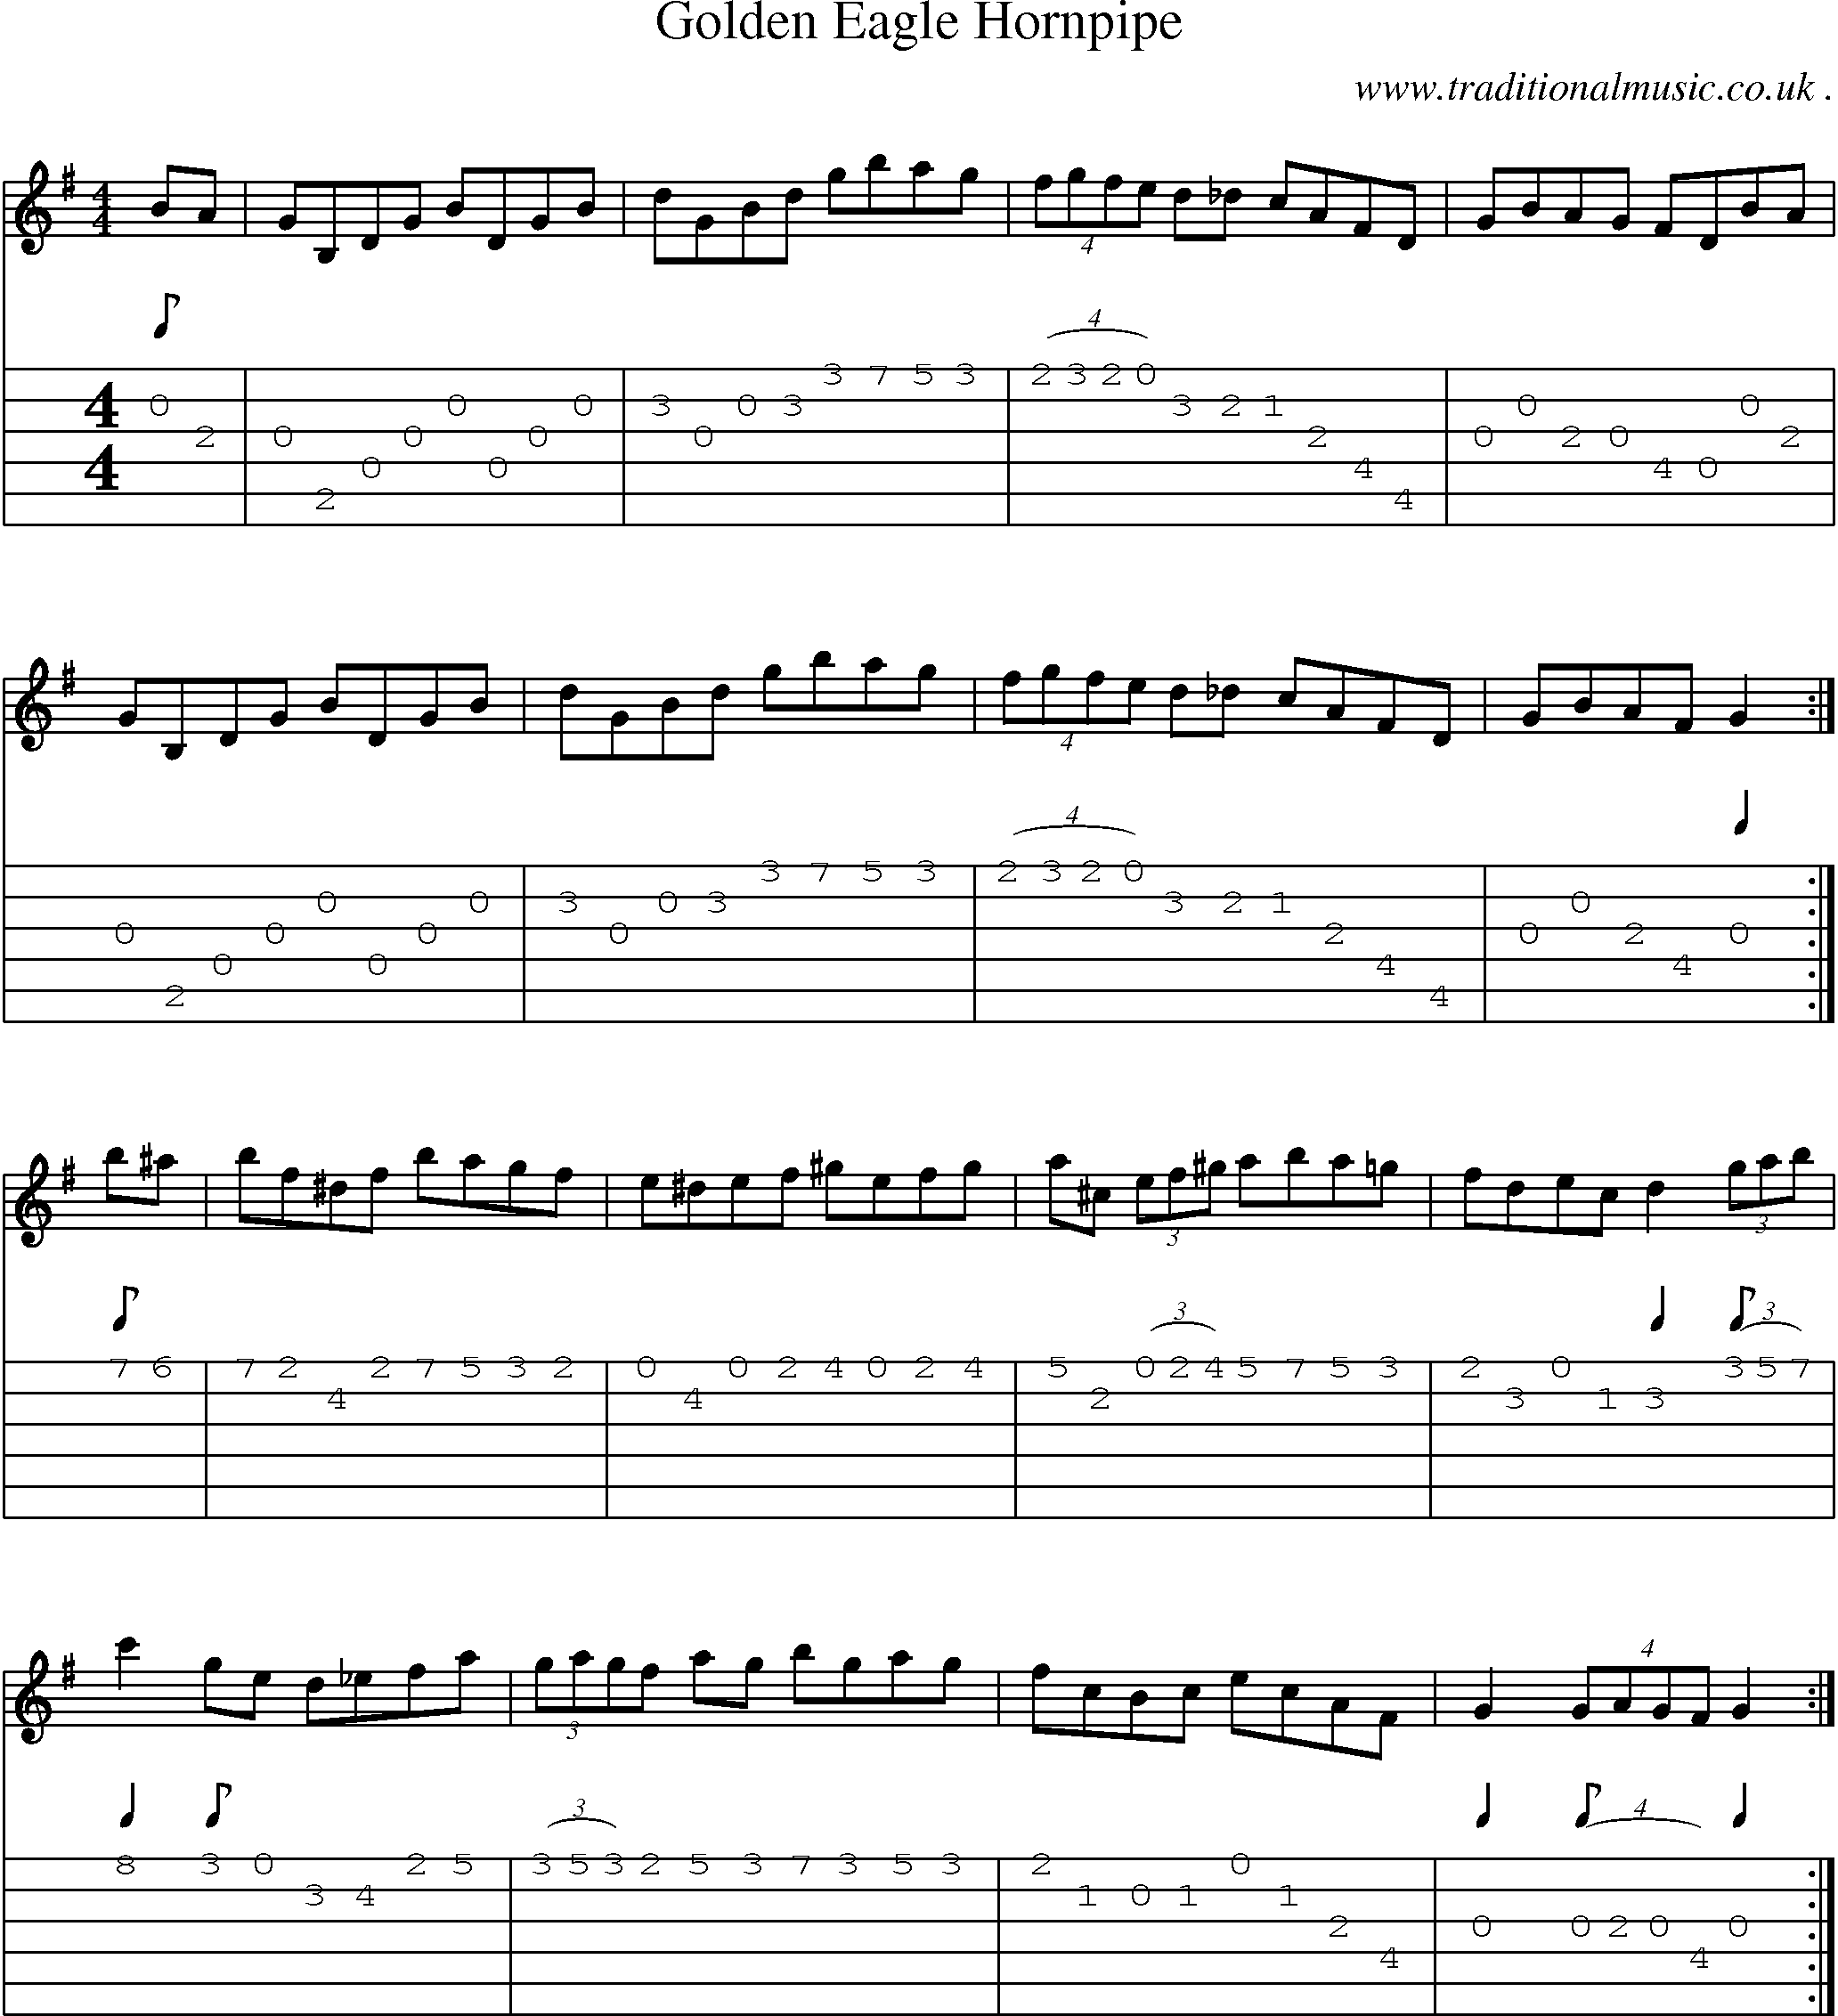 Music Score and Guitar Tabs for Golden Eagle Hornpipe